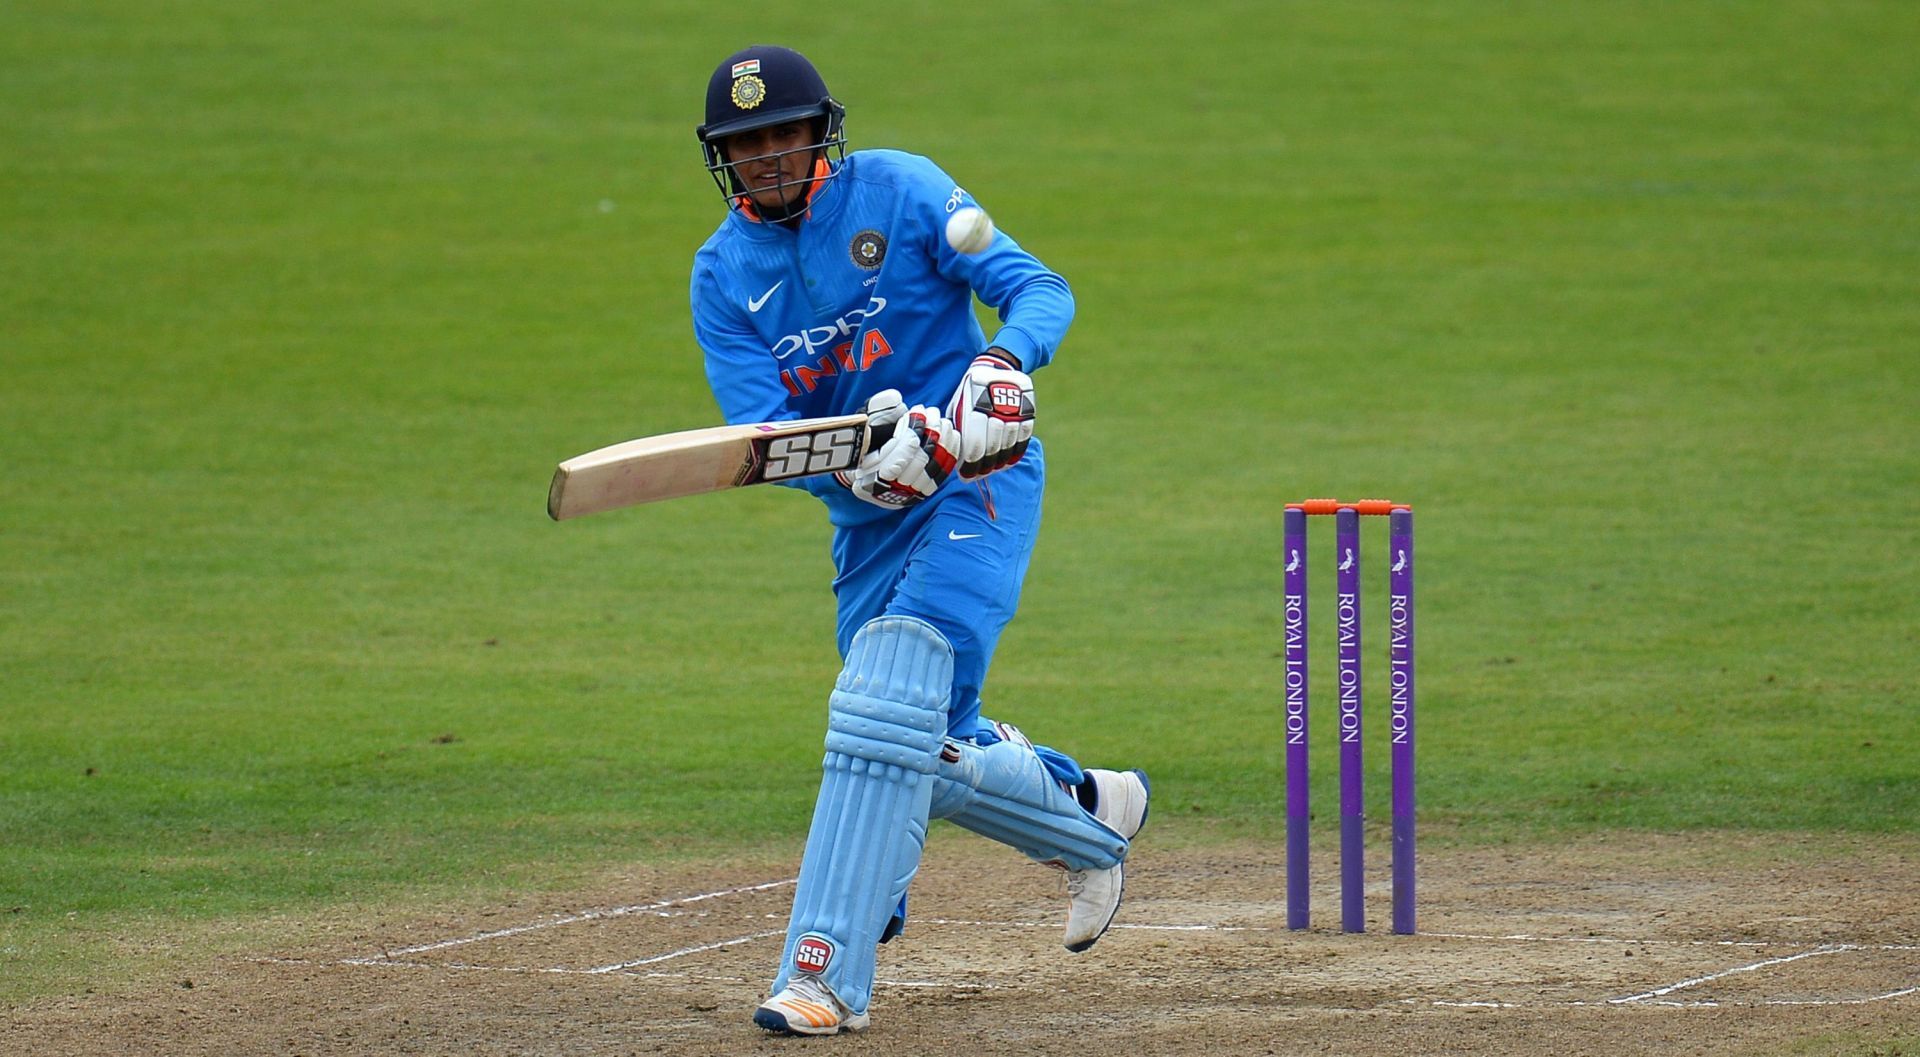 Shubman Gill rose to prominence with his excellent performances at the Under-19 level